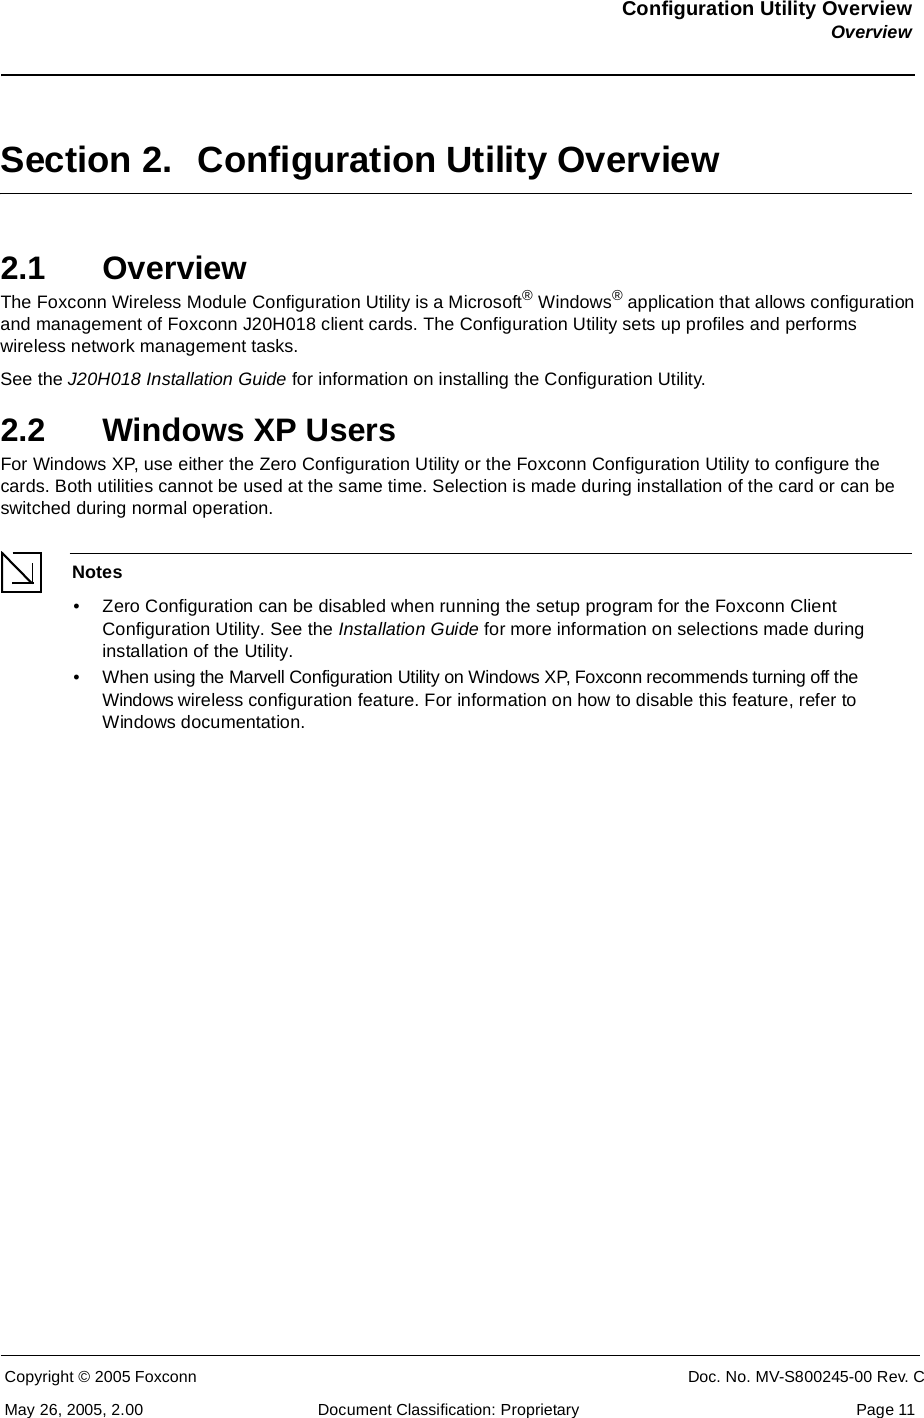 Configuration Utility OverviewOverviewCopyright © 2005 Foxconn CONFIDENTIAL Doc. No. MV-S800245-00 Rev. CMay 26, 2005, 2.00 Document Classification: Proprietary  Page 11Section 2. Configuration Utility Overview2.1 OverviewThe Foxconn Wireless Module Configuration Utility is a Microsoft® Windows® application that allows configuration and management of Foxconn J20H018 client cards. The Configuration Utility sets up profiles and performs wireless network management tasks. See the J20H018 Installation Guide for information on installing the Configuration Utility.2.2 Windows XP UsersFor Windows XP, use either the Zero Configuration Utility or the Foxconn Configuration Utility to configure the cards. Both utilities cannot be used at the same time. Selection is made during installation of the card or can be switched during normal operation.Notes• Zero Configuration can be disabled when running the setup program for the Foxconn Client Configuration Utility. See the Installation Guide for more information on selections made during installation of the Utility.• When using the Marvell Configuration Utility on Windows XP, Foxconn recommends turning off the Windows wireless configuration feature. For information on how to disable this feature, refer to Windows documentation.